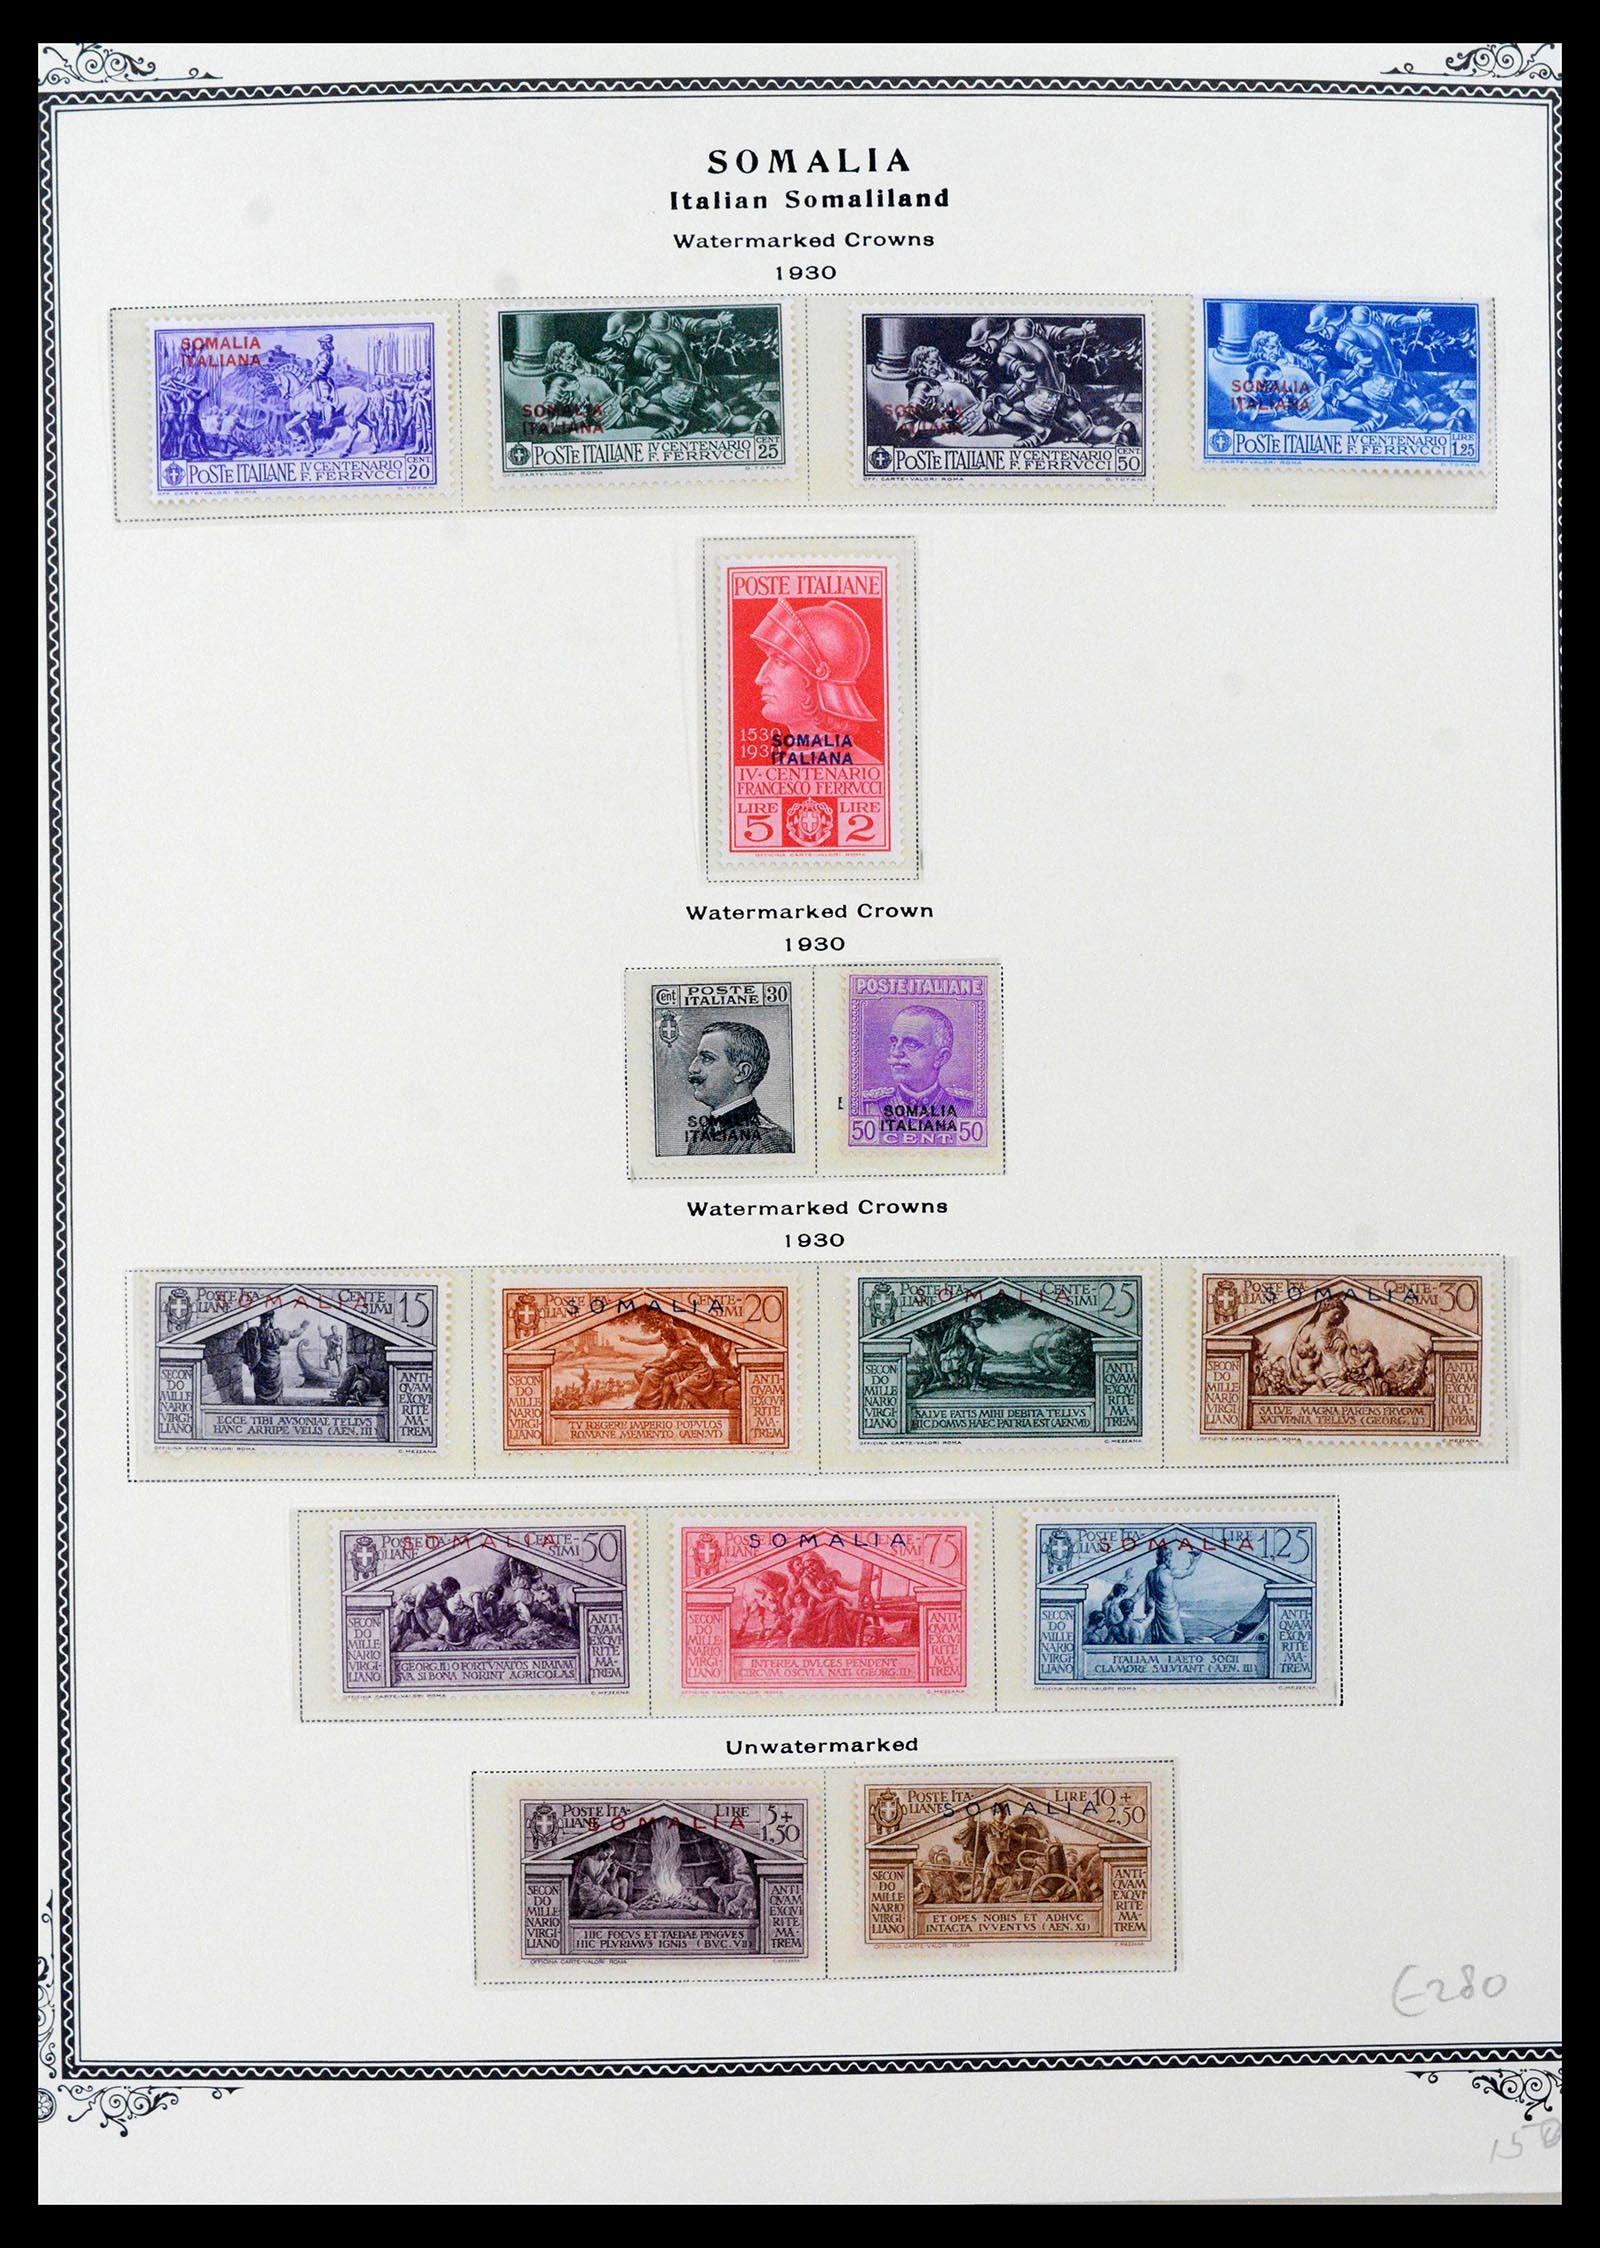 39011 0010 - Stamp collection 39011 Somalia complete 1903-1960.